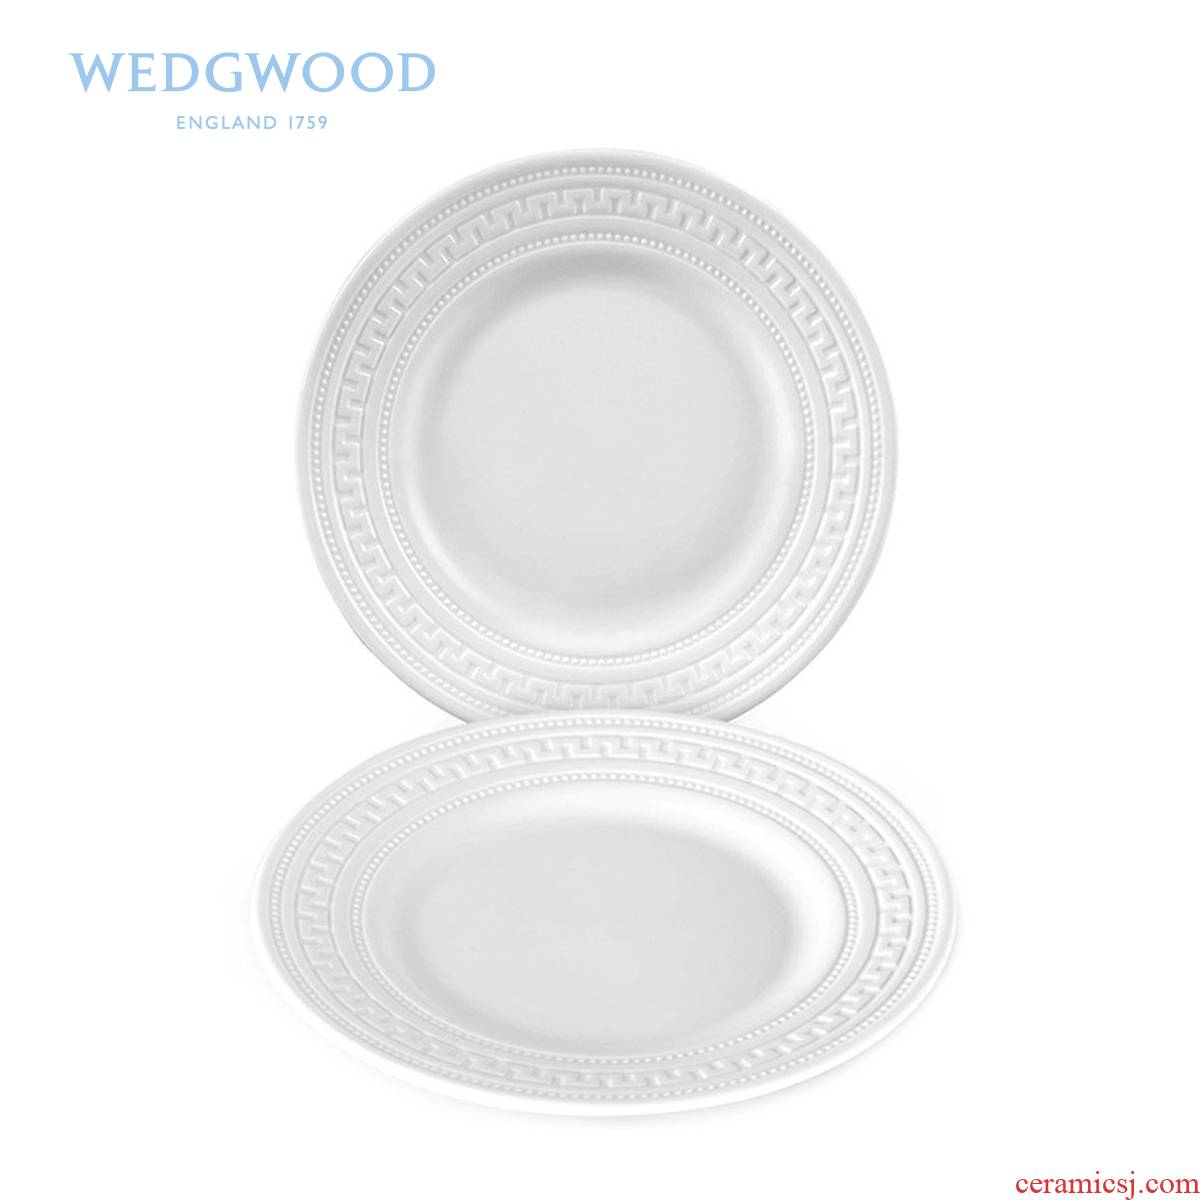 British Wedgwood waterford Wedgwood Intaglio relief 15 cm ipads porcelain plates only 2 ipads porcelain dinning plate